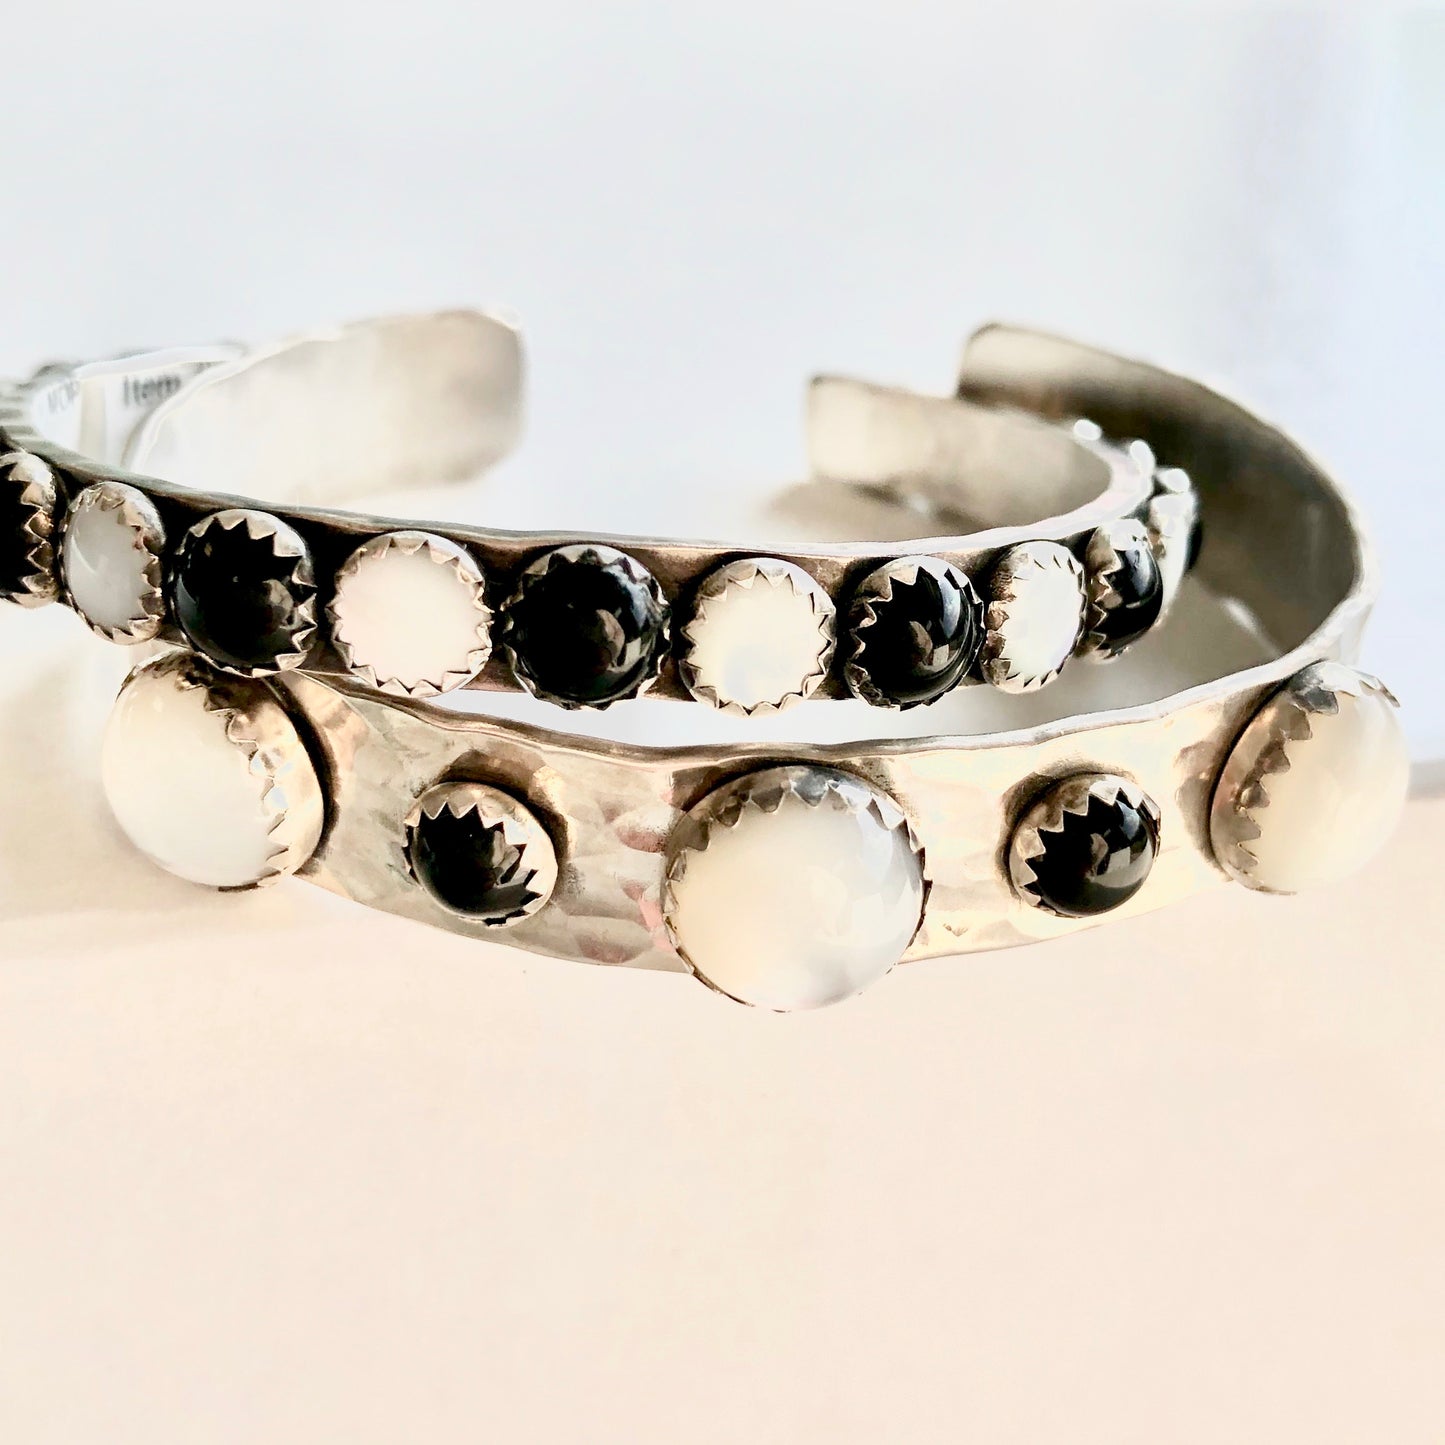 10MM Cuff with Mother of Pearl and Black Onyx Cuffs Richard Schmidt   